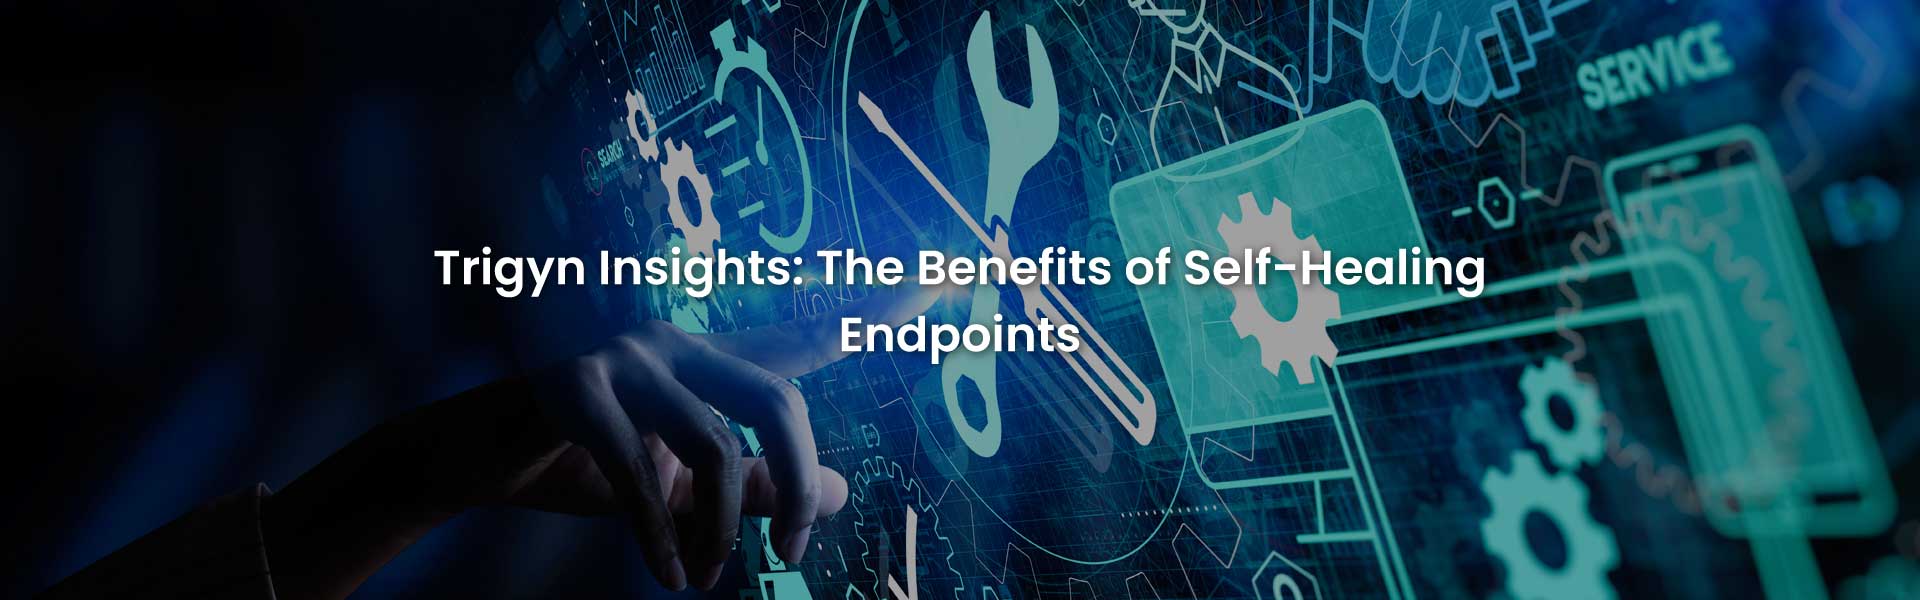 Benefits of Self-Healing Endpoints